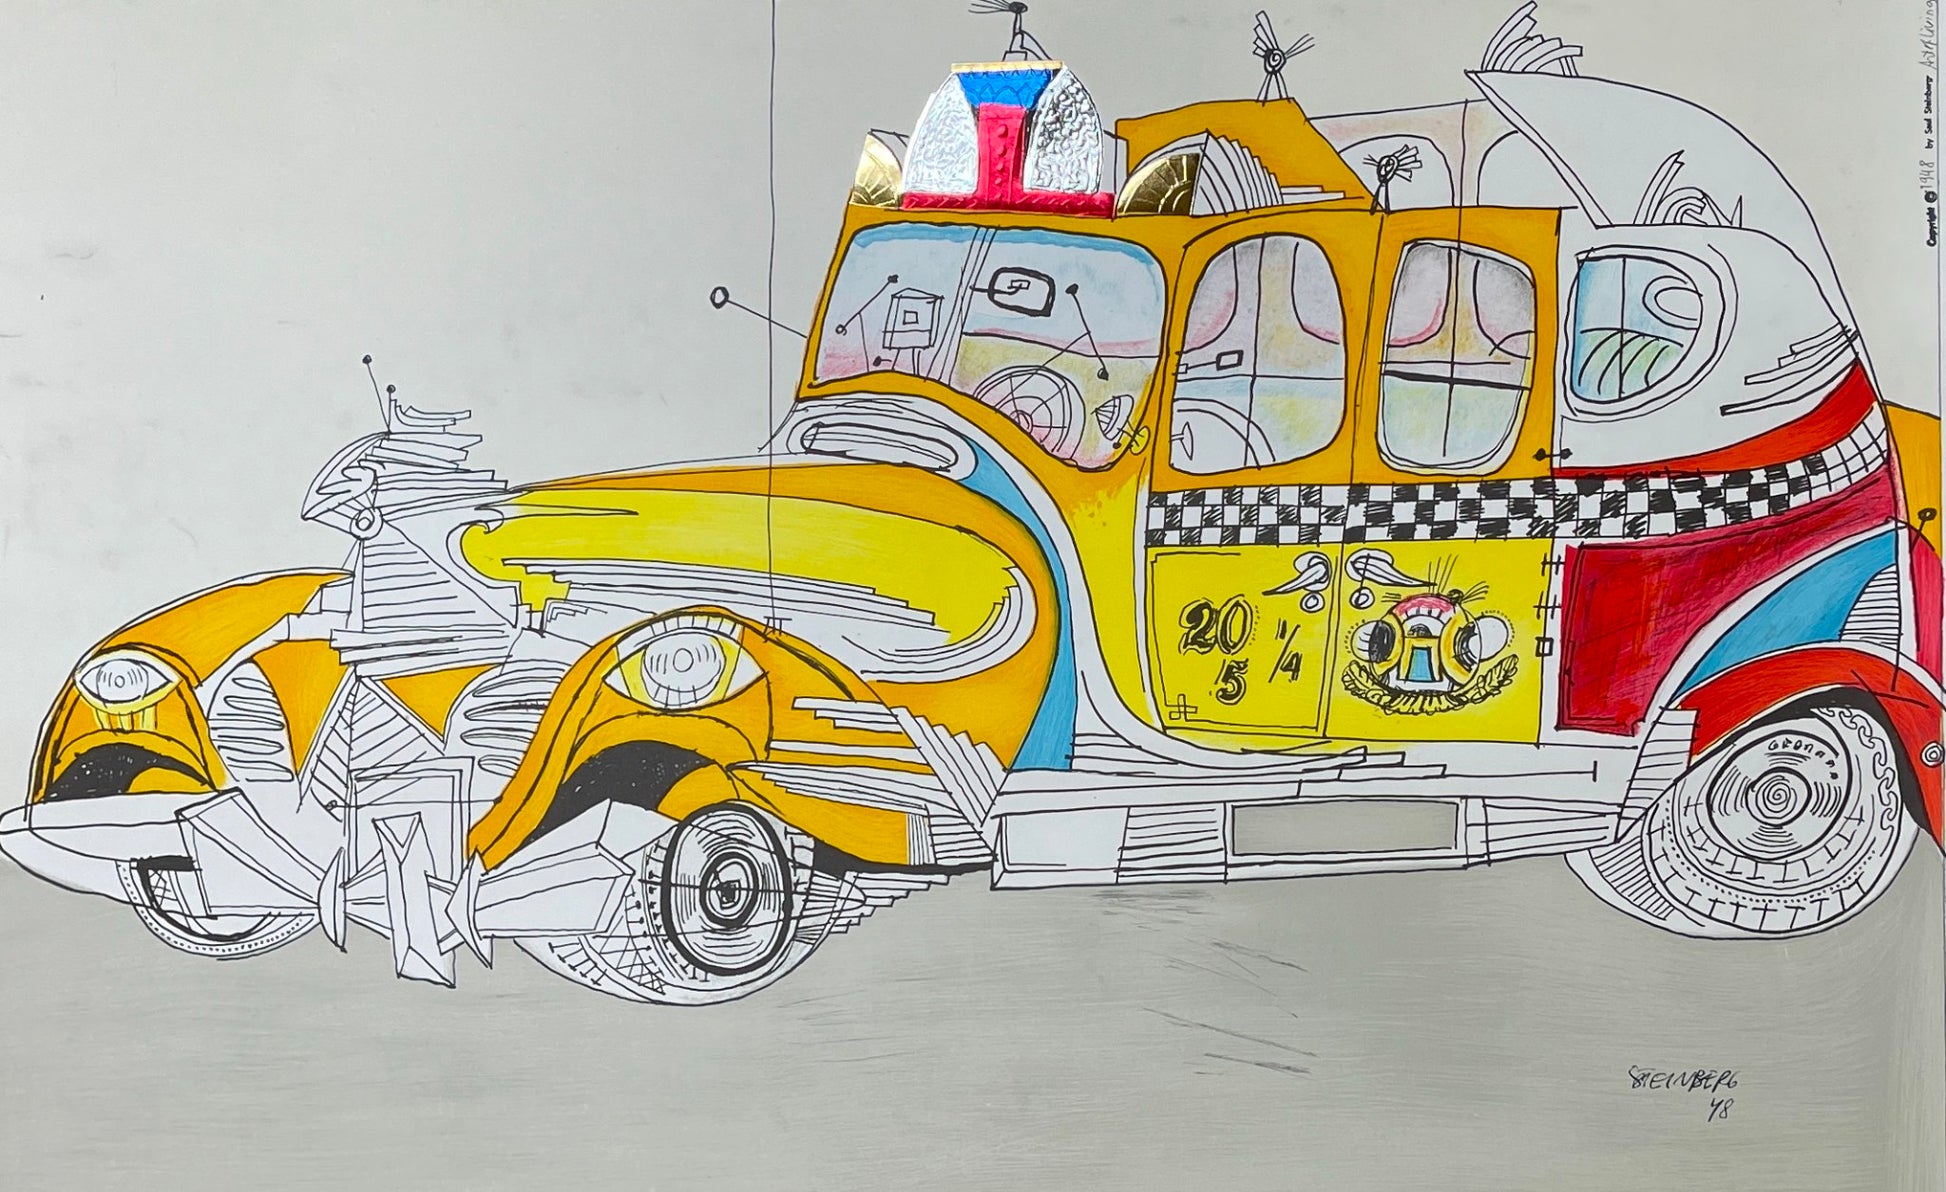 Exhibition Poster - Saul Steinberg - Taxi Drawing - Galerie Maeght Paris 1977 - Dahlströms Fine Art